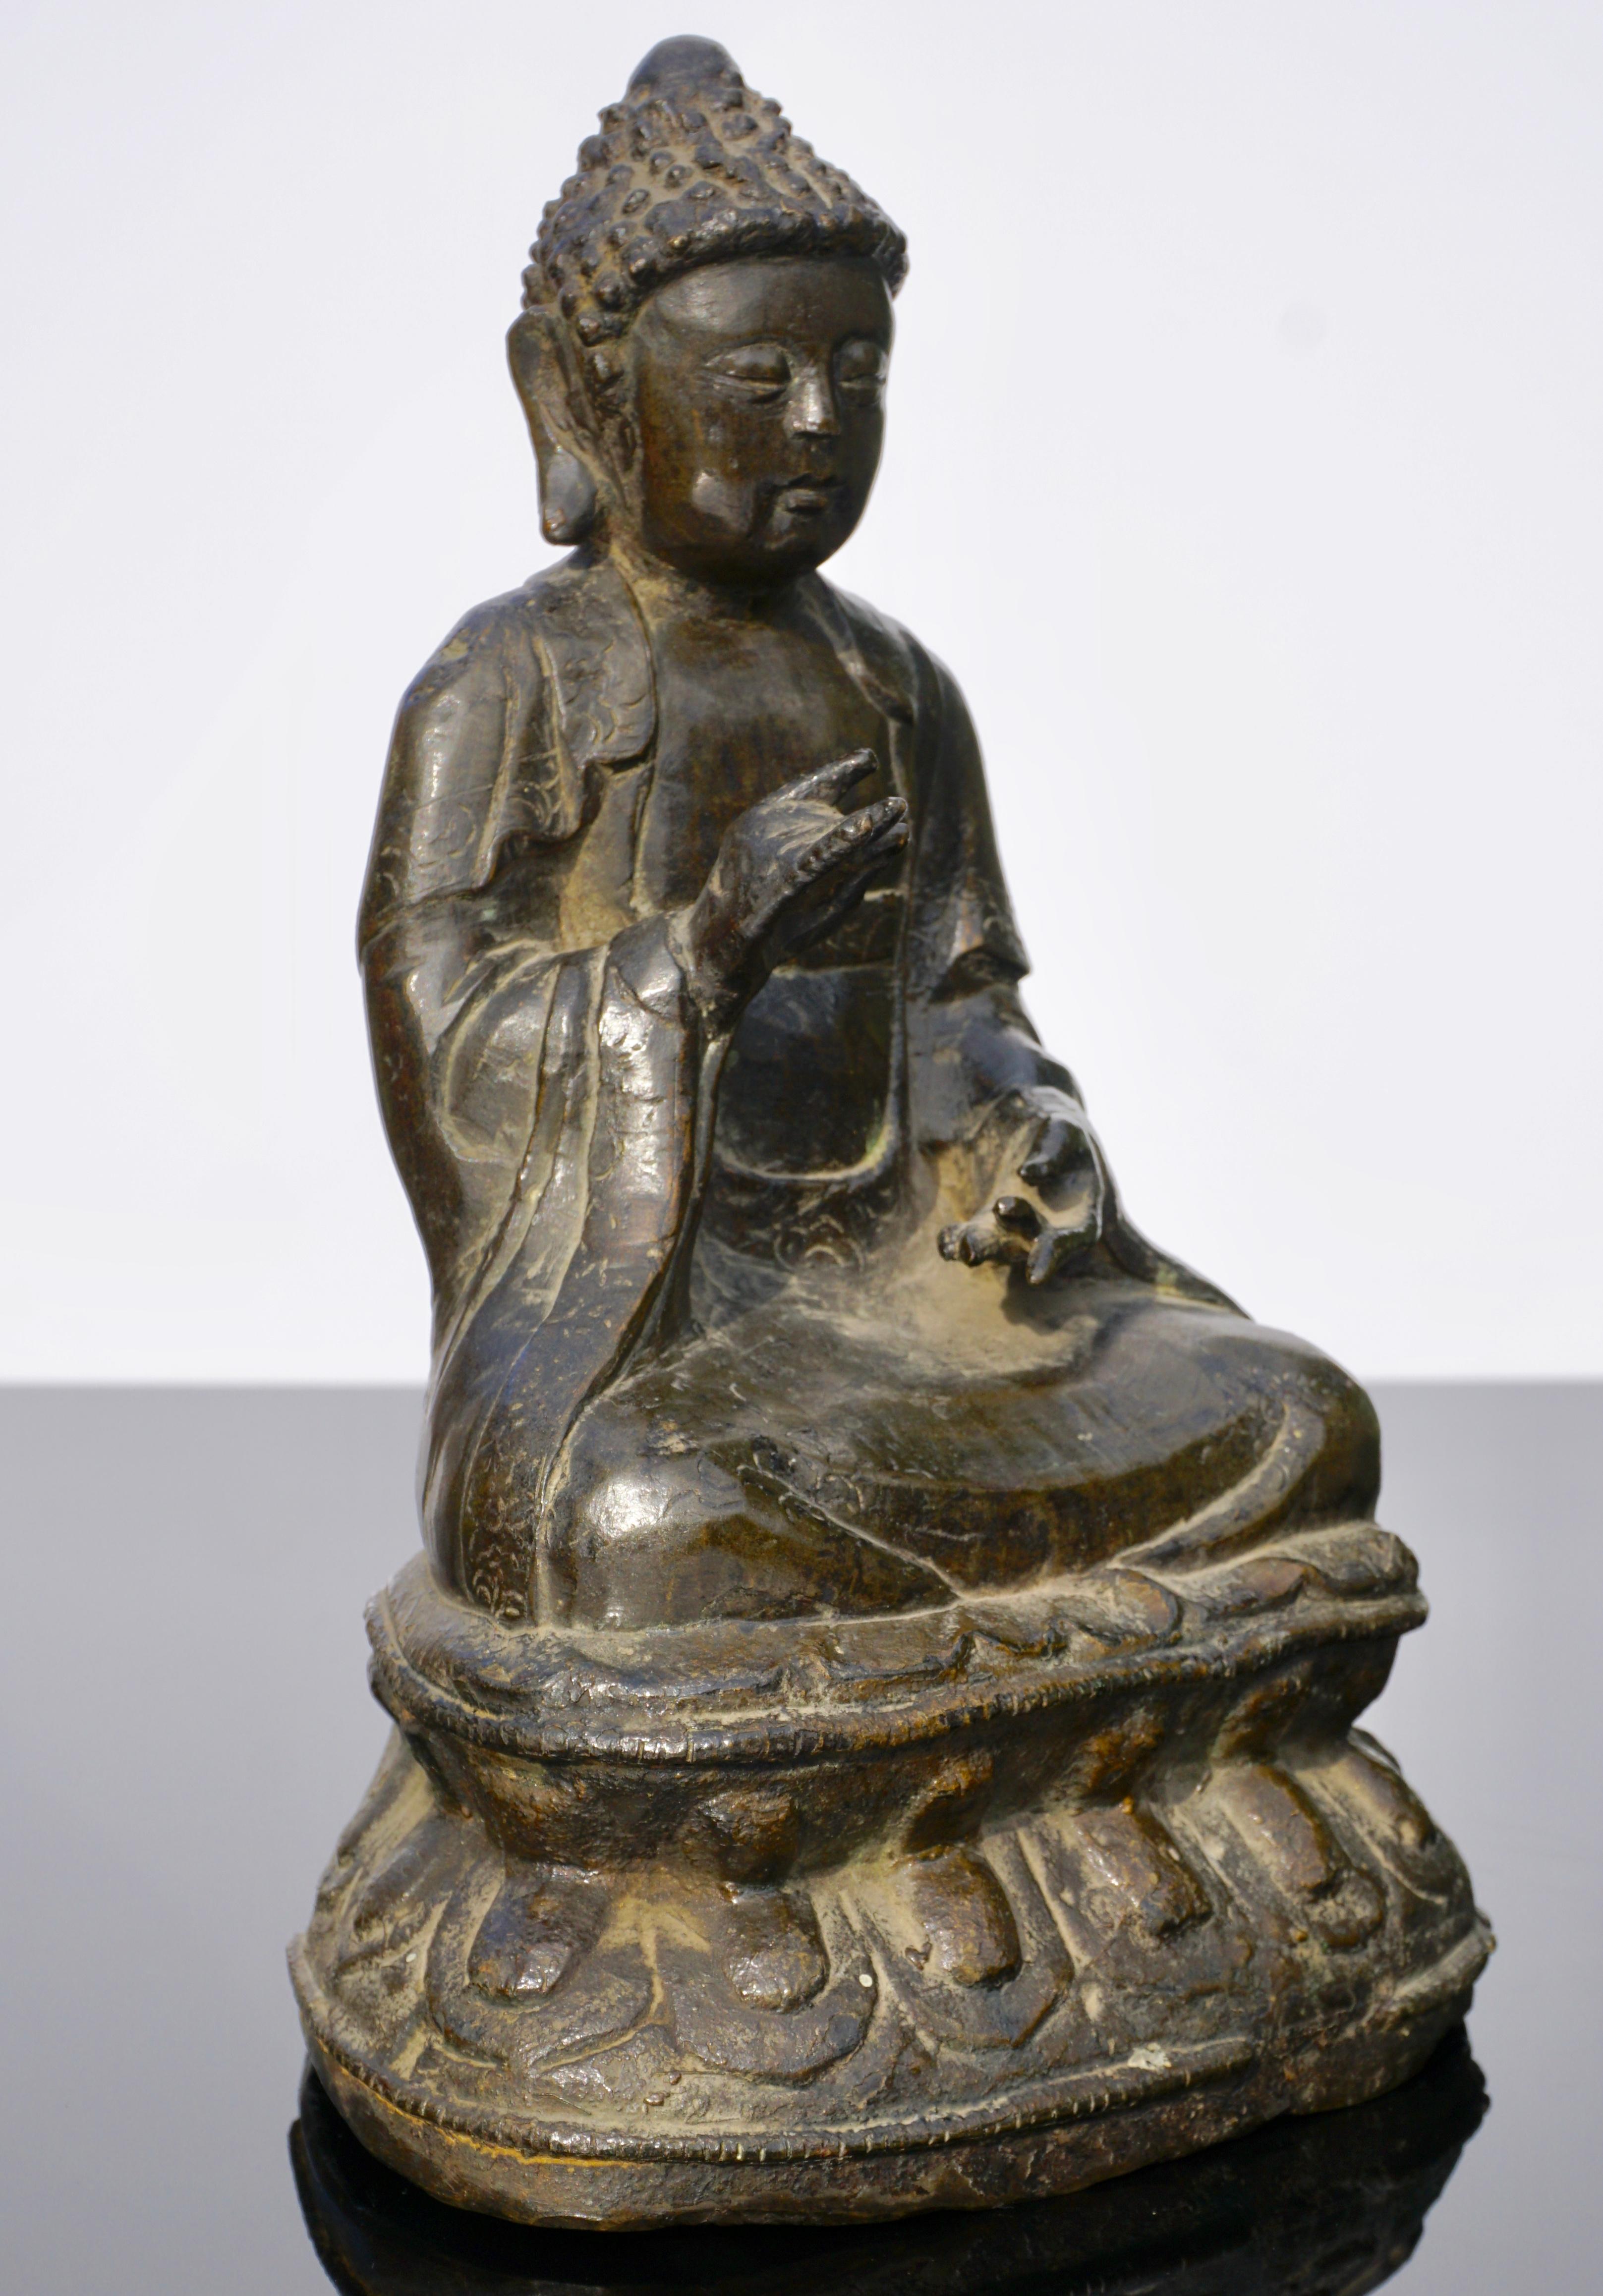 A 18th century or earlier Provincial large bronze figure of Buddha at 10 inches. His gaze downward in serenity his hands in abhisekana mudra seated on a double lotus. A nice older Buddha with limited detail, China, circa 1800.

Measures: Height 10